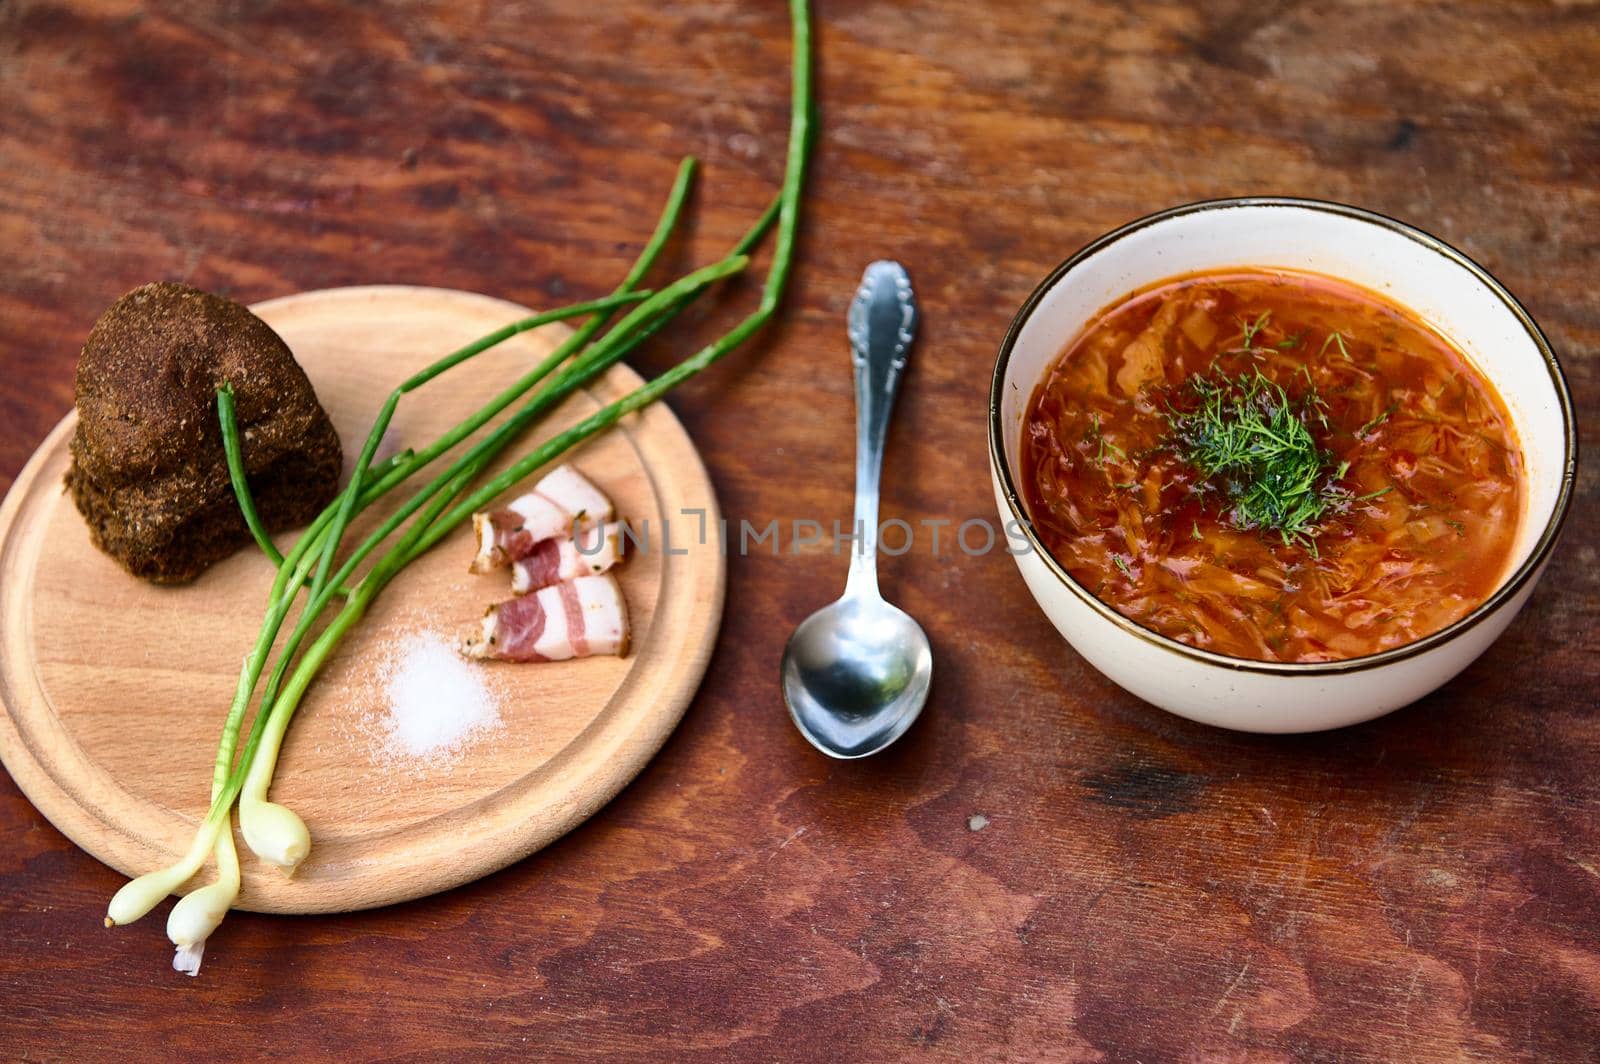 Overhead view of a bowl of beetroot soup with parsley - Ukrainian borscht - and a wooden board with green onion, dill, salt, bacon and whole grain rye bread. Traditional Ukrainian cuisine